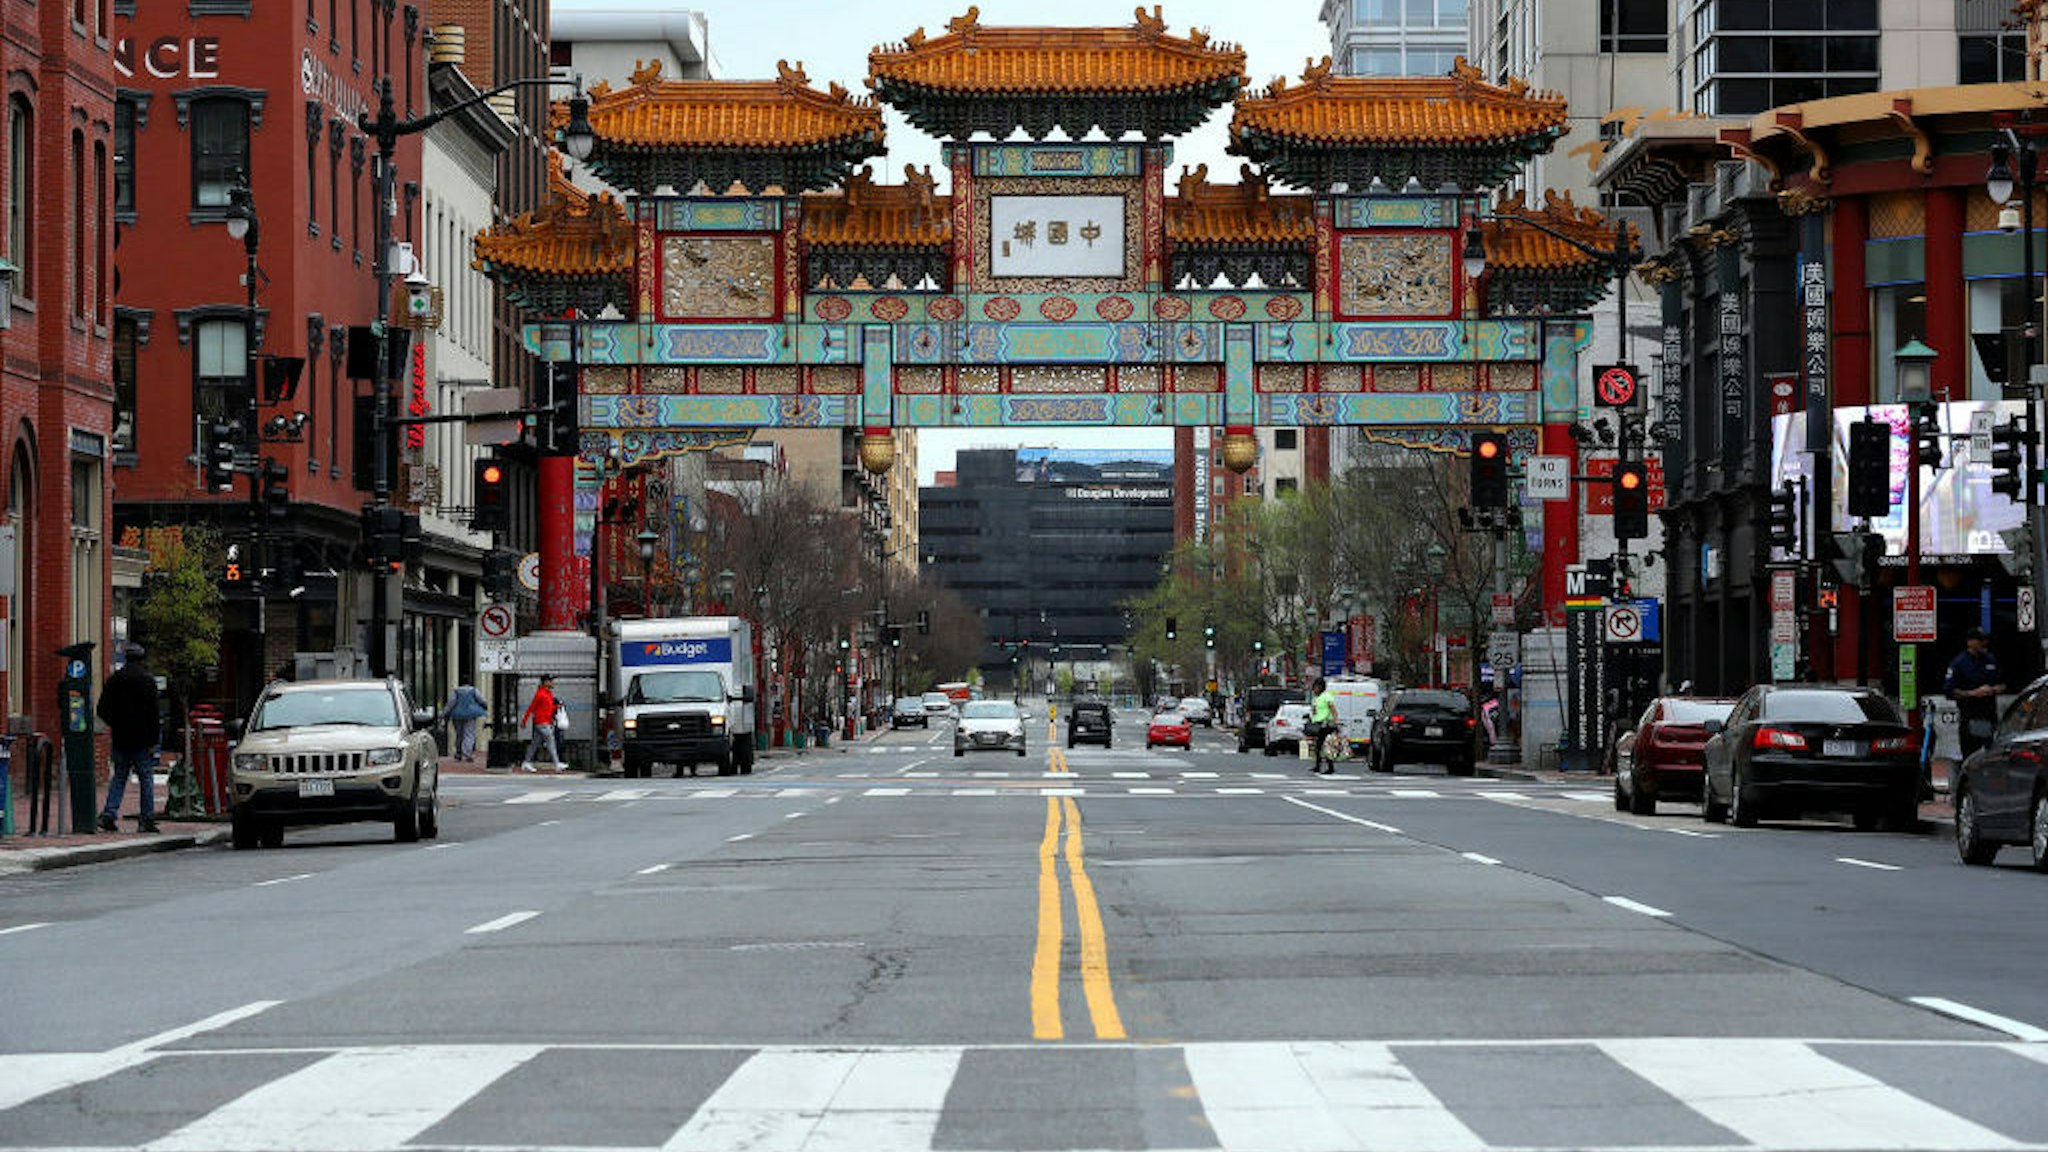 Streets and plazas are empty in the Chinatown neighborhood as people stay home and non-essential businesses are ordered closed due to the ongoing coronavirus pandemic March 27, 2020 in Washington, DC. The United States surpassed China and Italy as the country with the most coronavirus cases with more than 97,000 people confirmed and more than 1,000 people having died from COVID-19. (Photo by Chip Somodevilla/Getty Images)